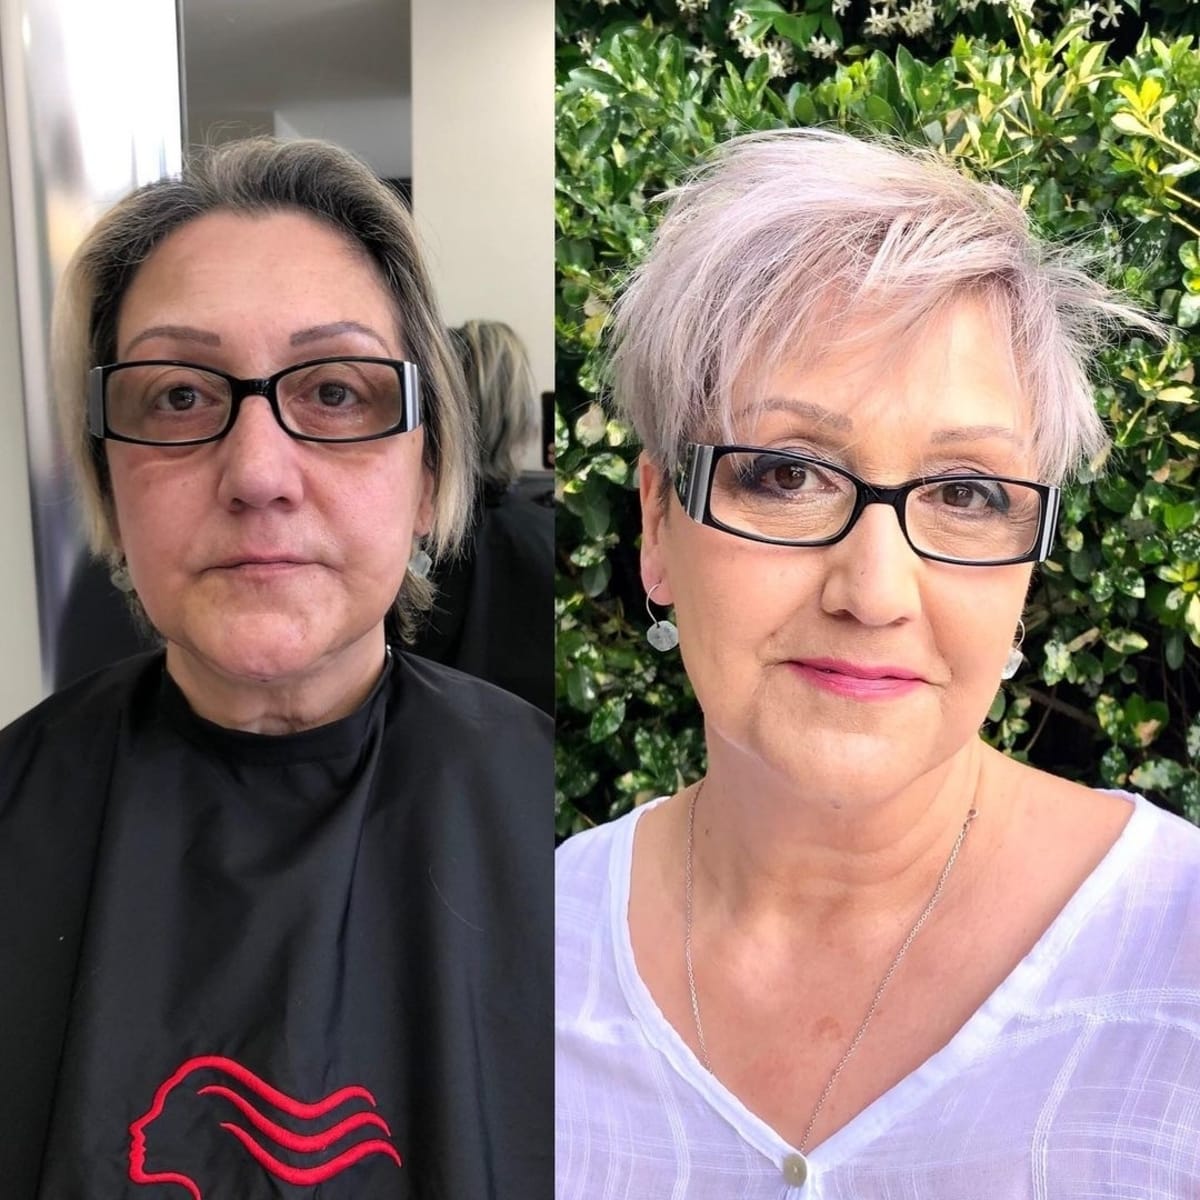 A woman in her 60s with a shaggy pixie makeover